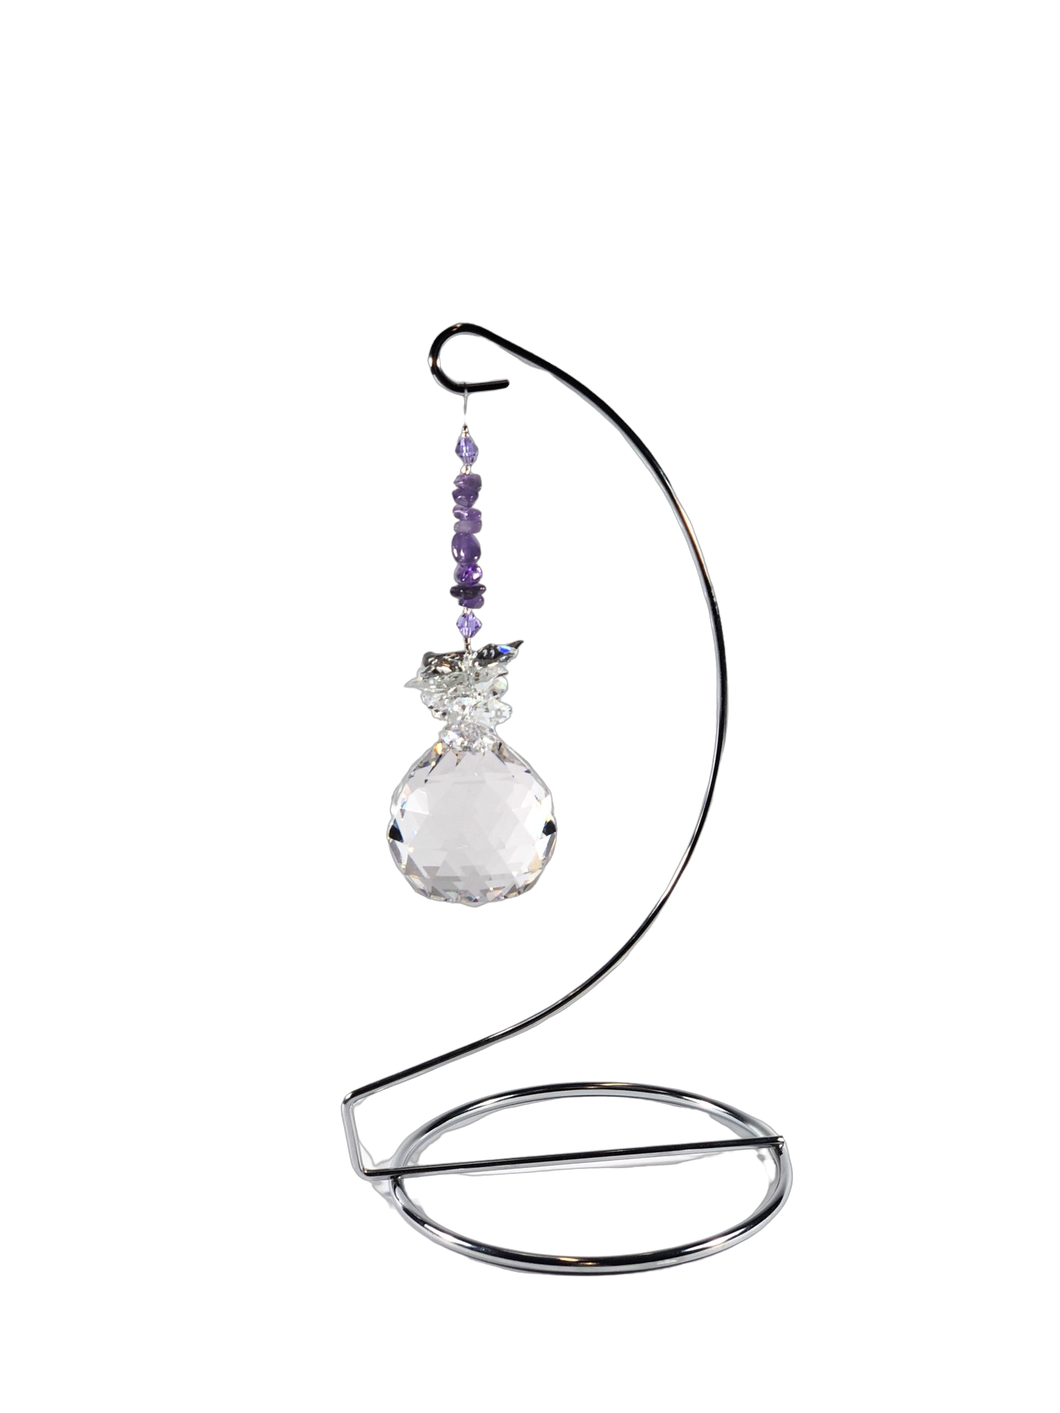 Butterfly - crystal suncatcher is decorated with amethyst gemstones and come on this amazing large stand.